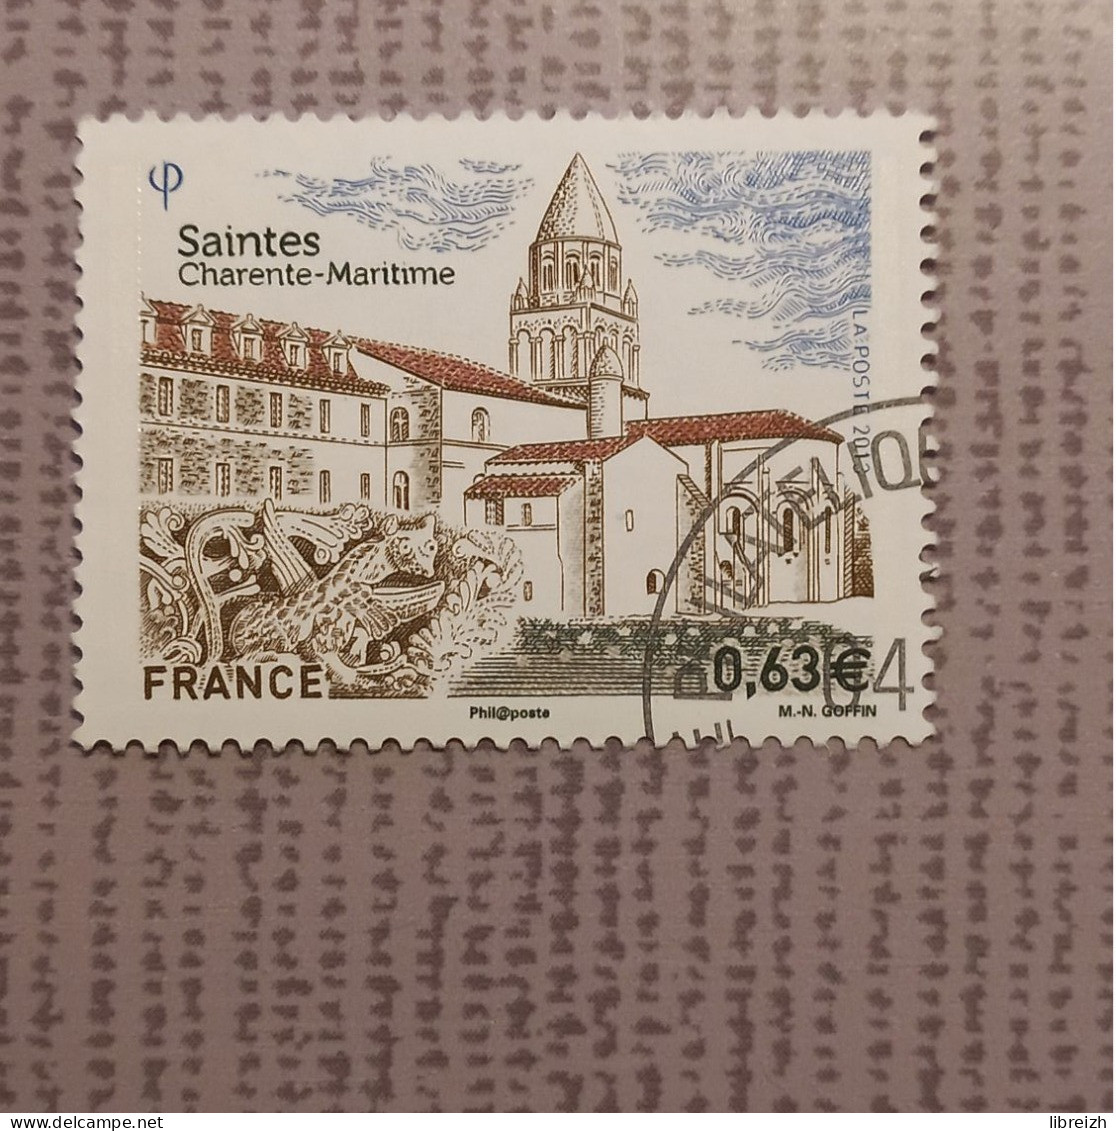 Saintes  N° 4753  Année 2013  ( Cachet Rond ) - Used Stamps